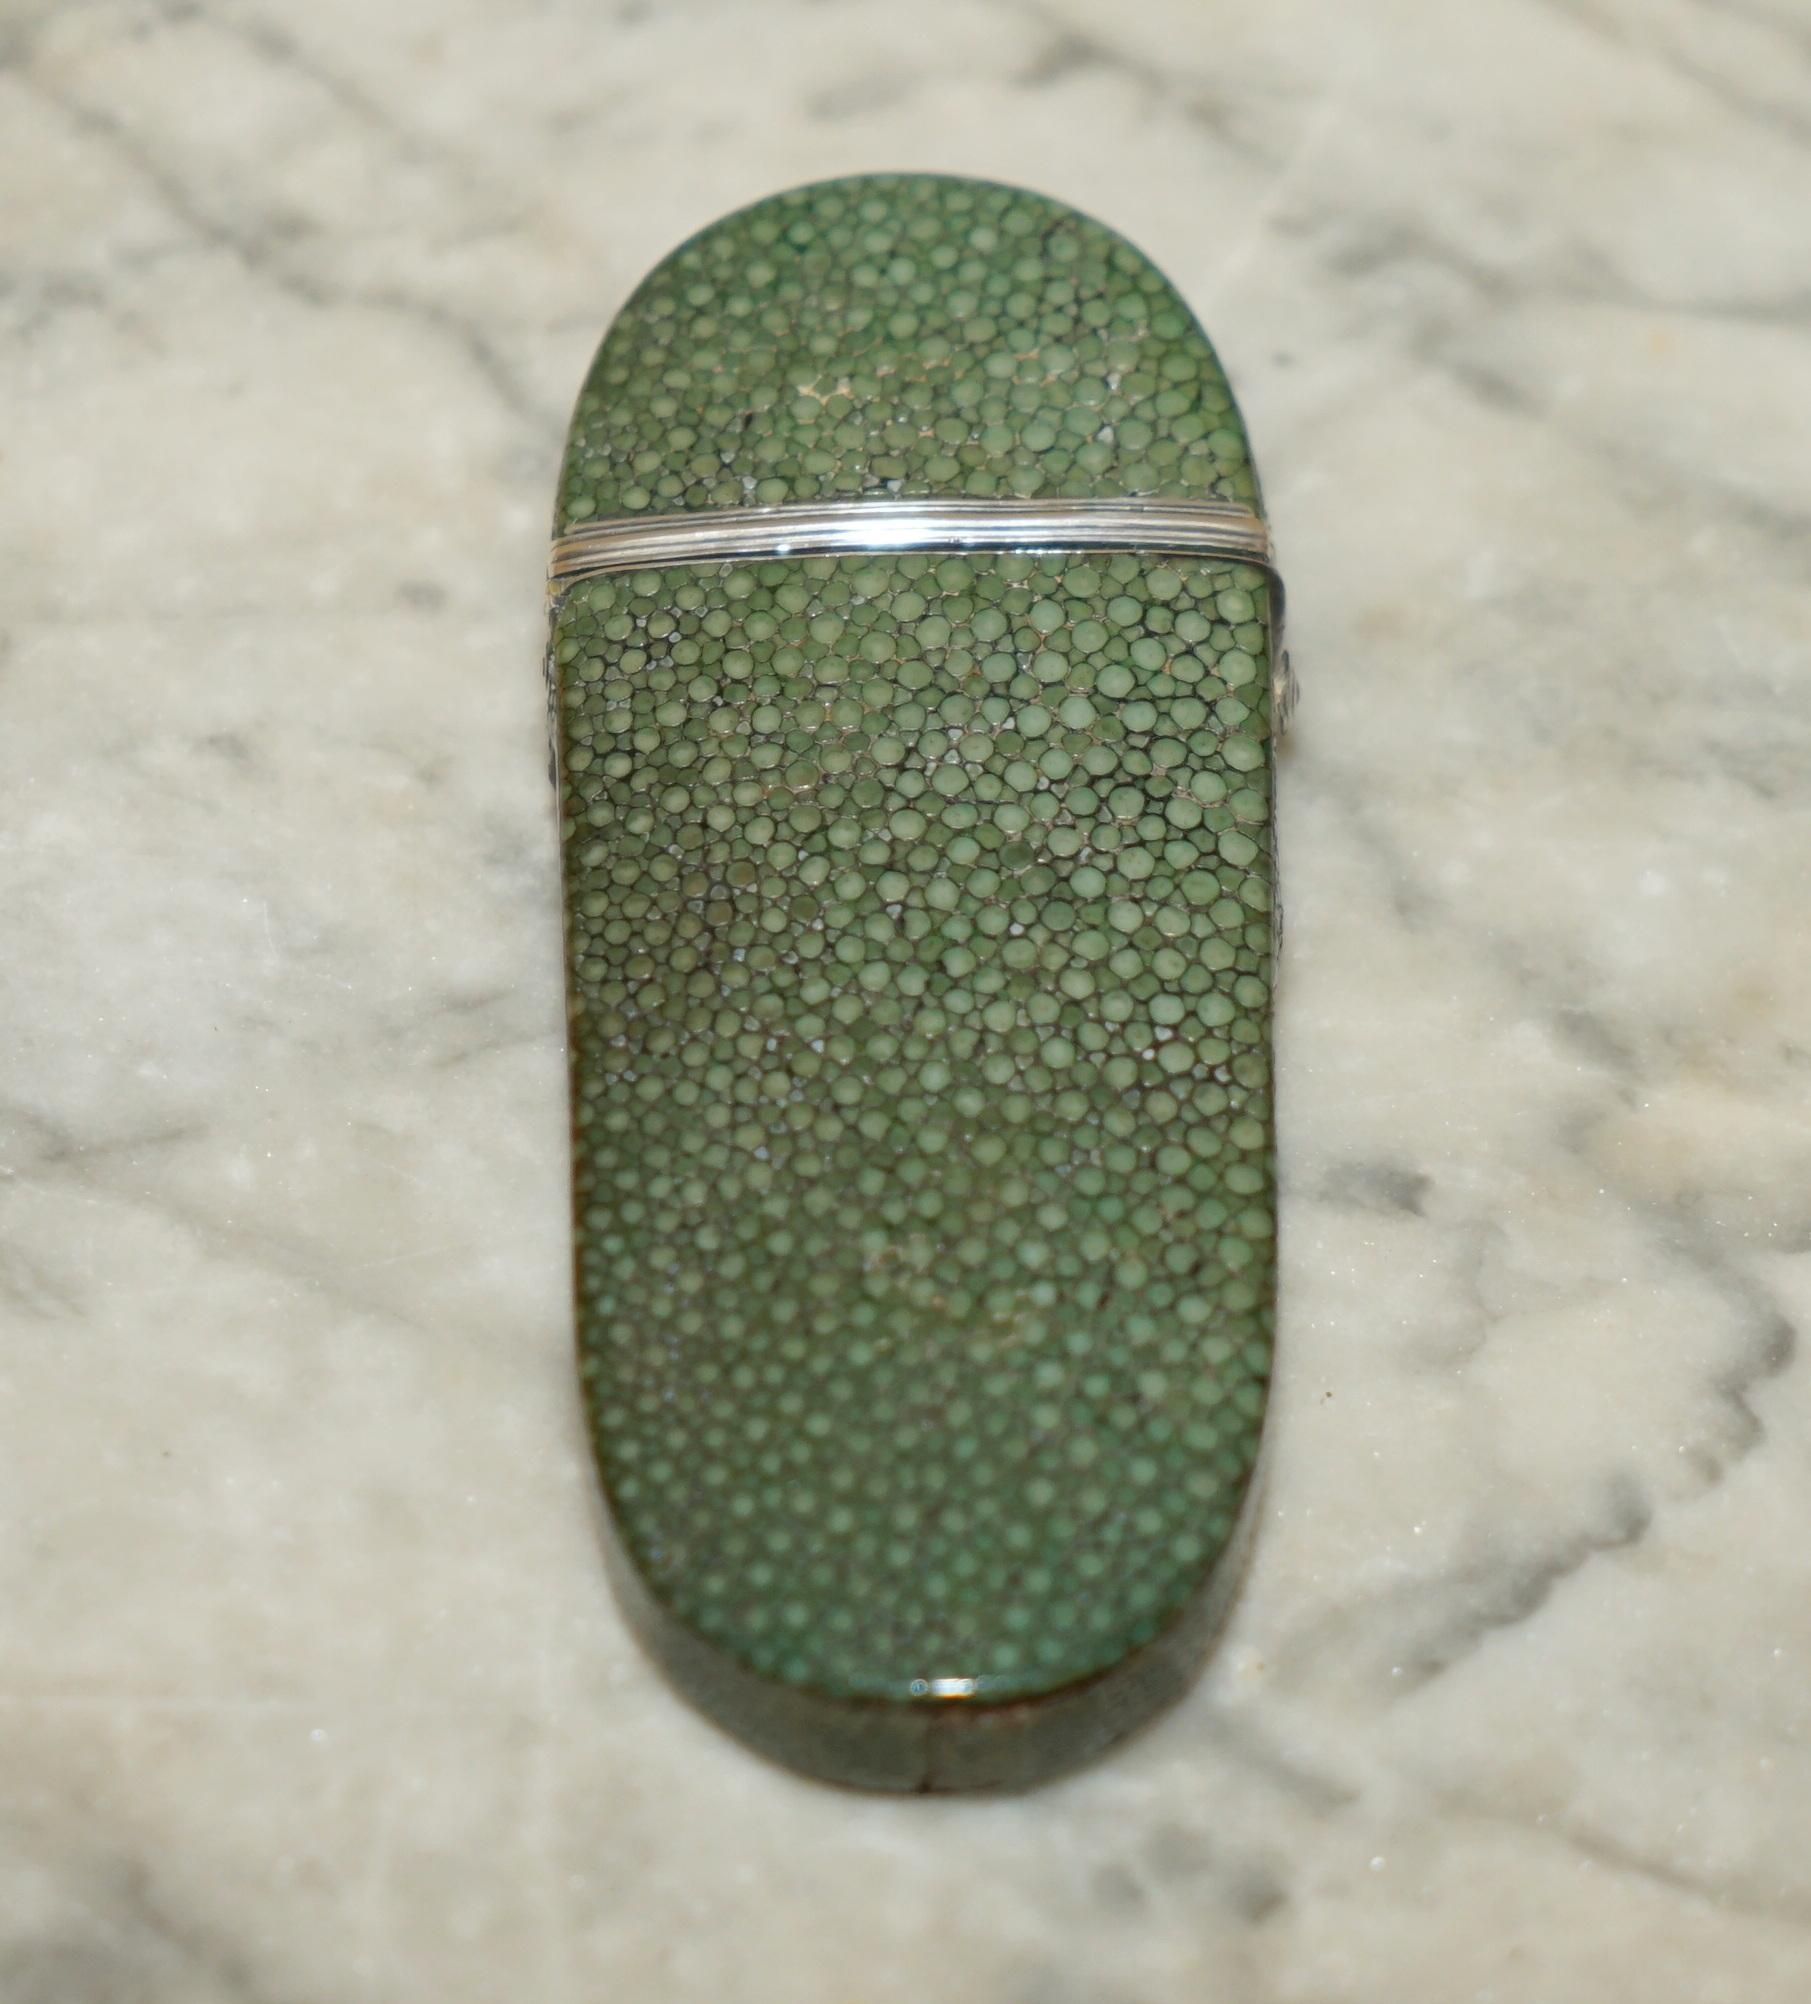 RARE ANTiQUE GEORGE III SHAGREEN GLASSES SPECTACLES CASE AND FOLDING GLASSES For Sale 4